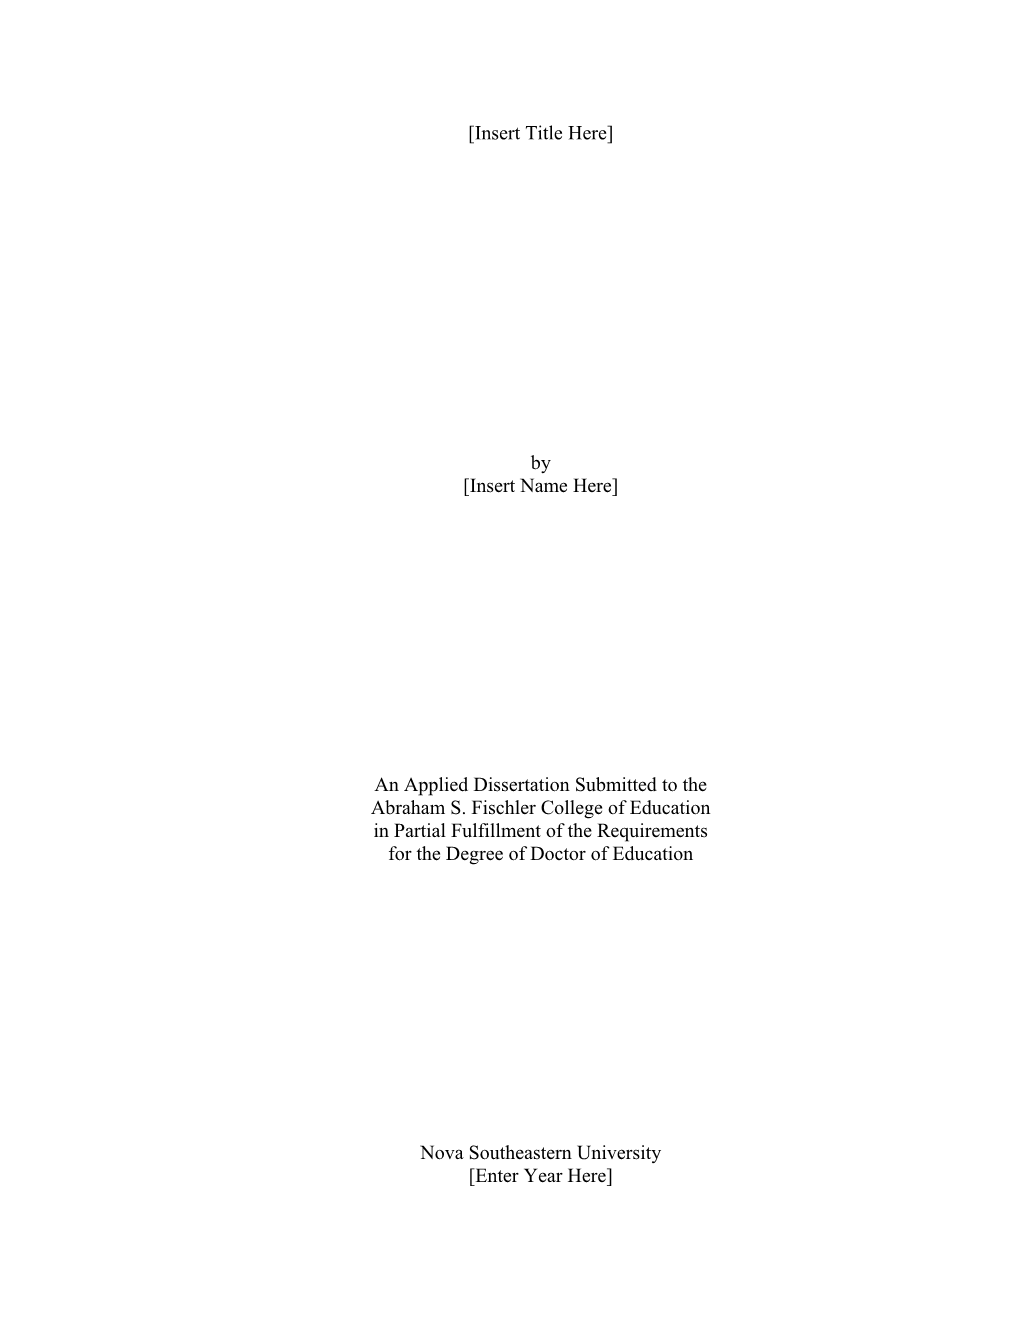 An Applied Dissertation Submitted to The